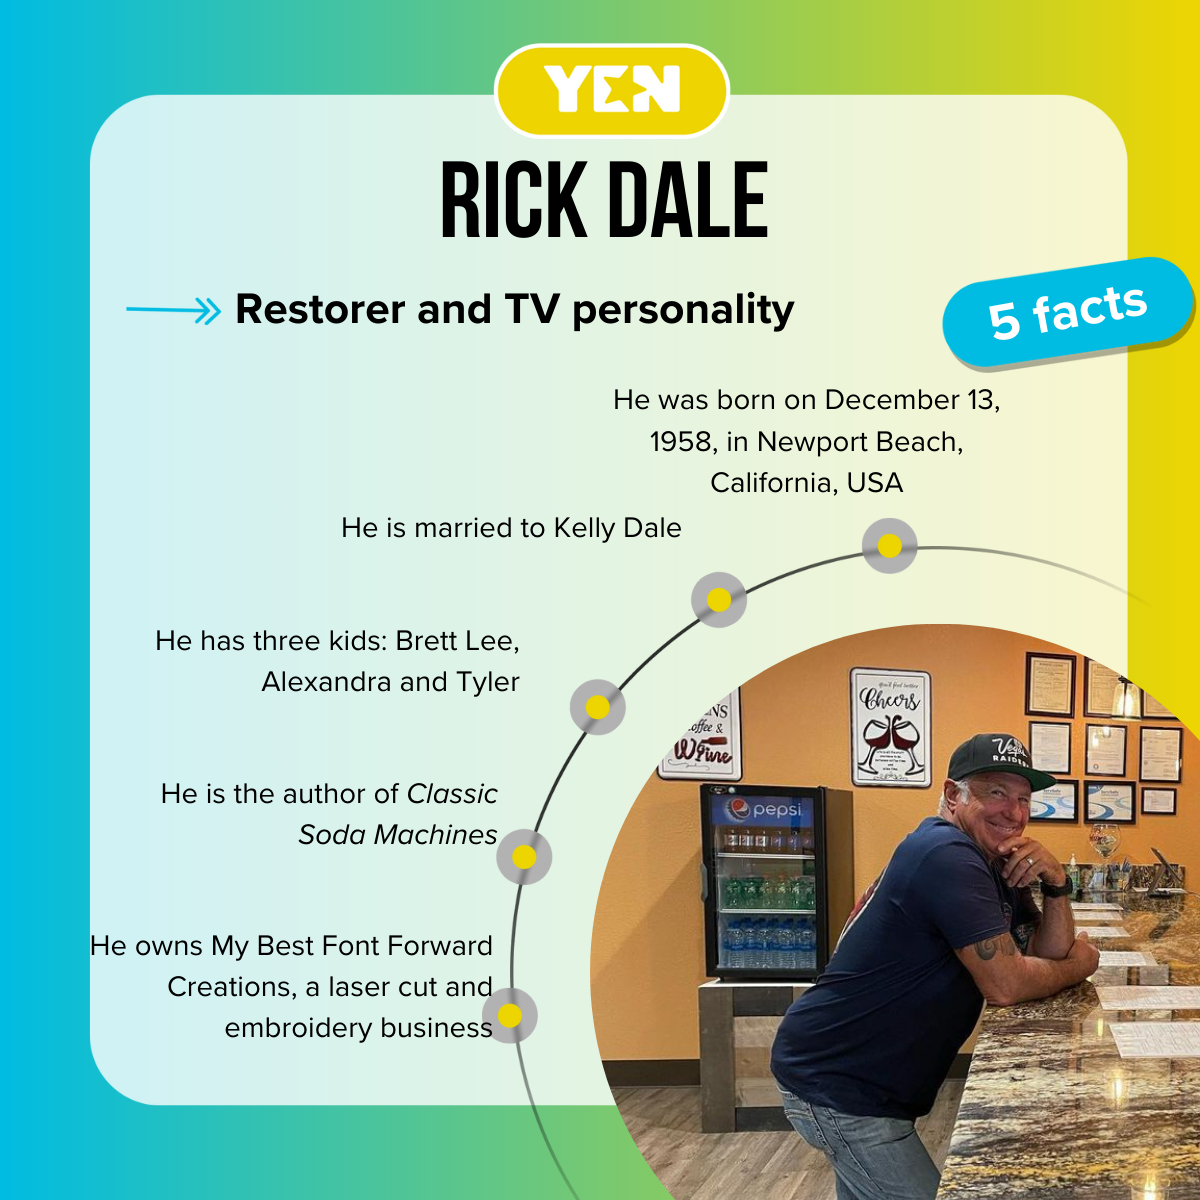 Top 5 facts about Rick Dale